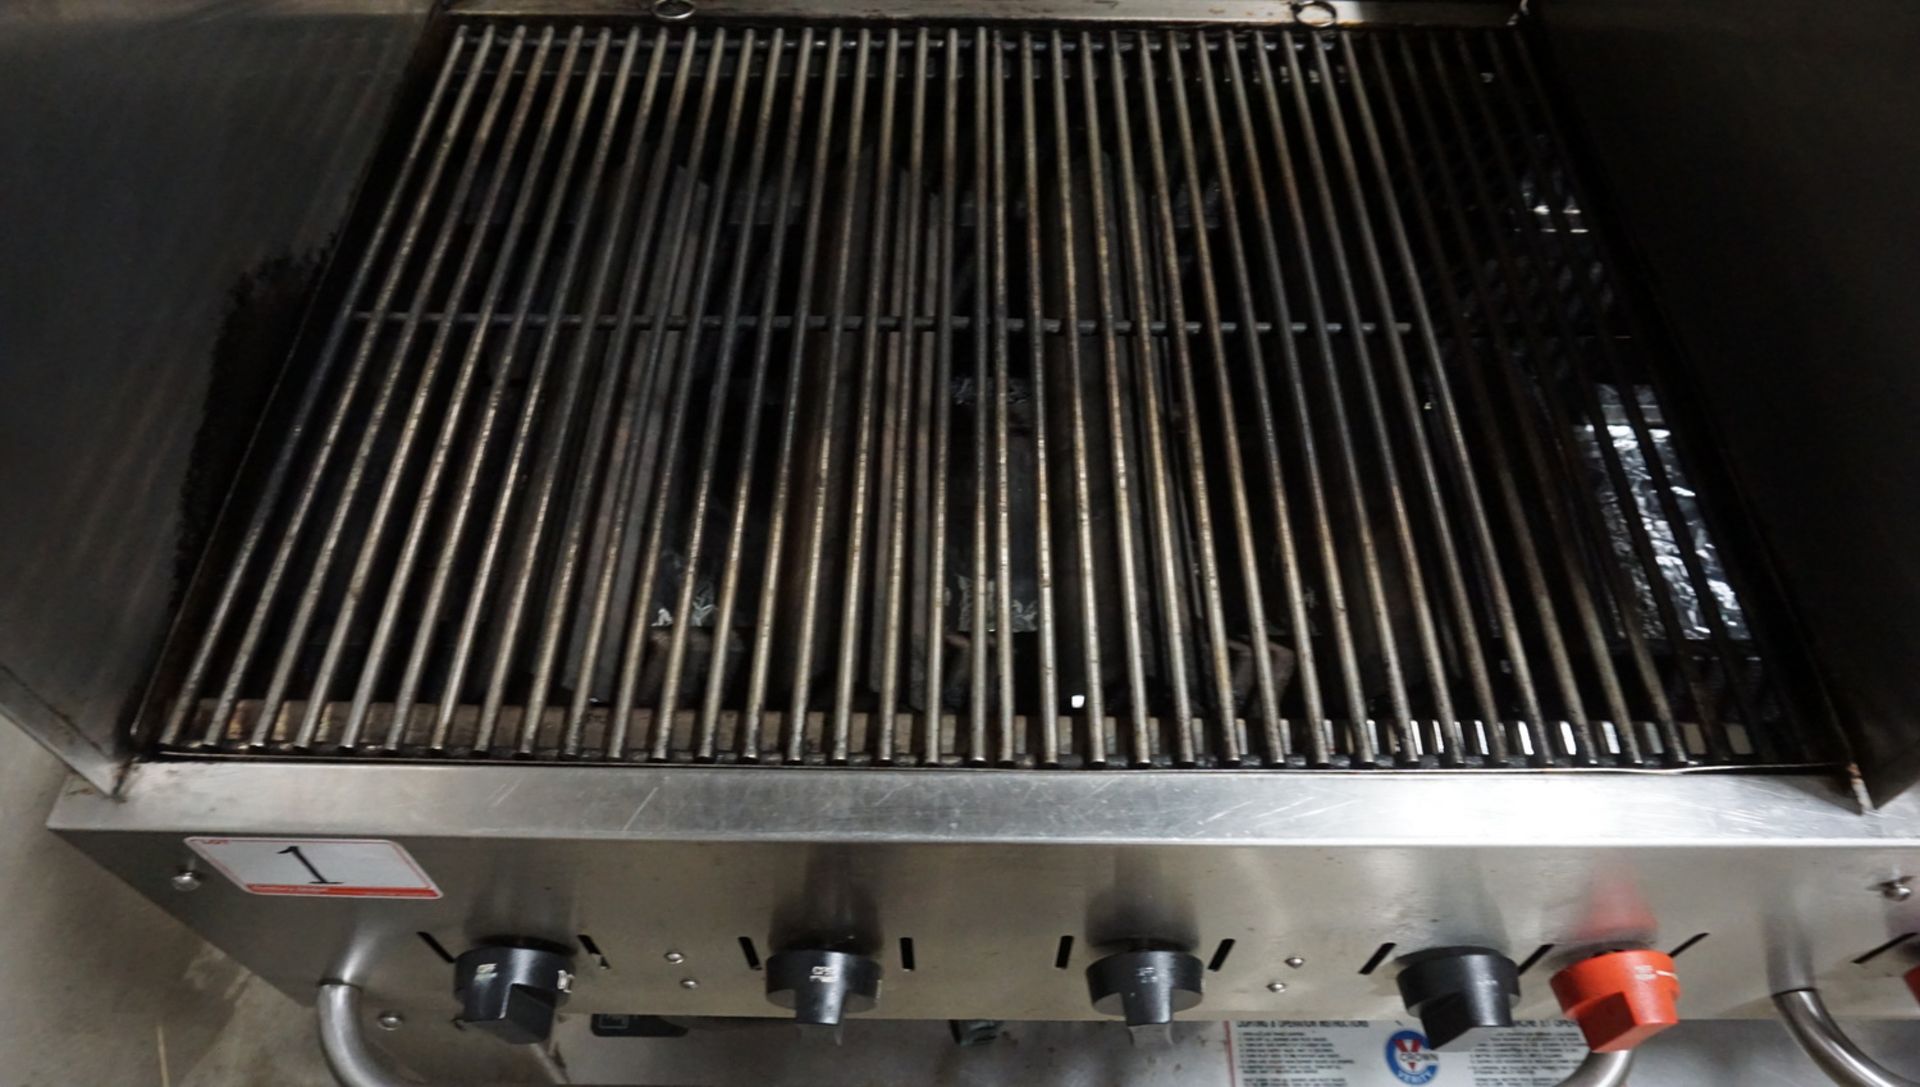 CROWN MCB-60 STAINLESS STEEL 60" 8-BURNER MOBILE PROPANE GRILL - Image 4 of 5